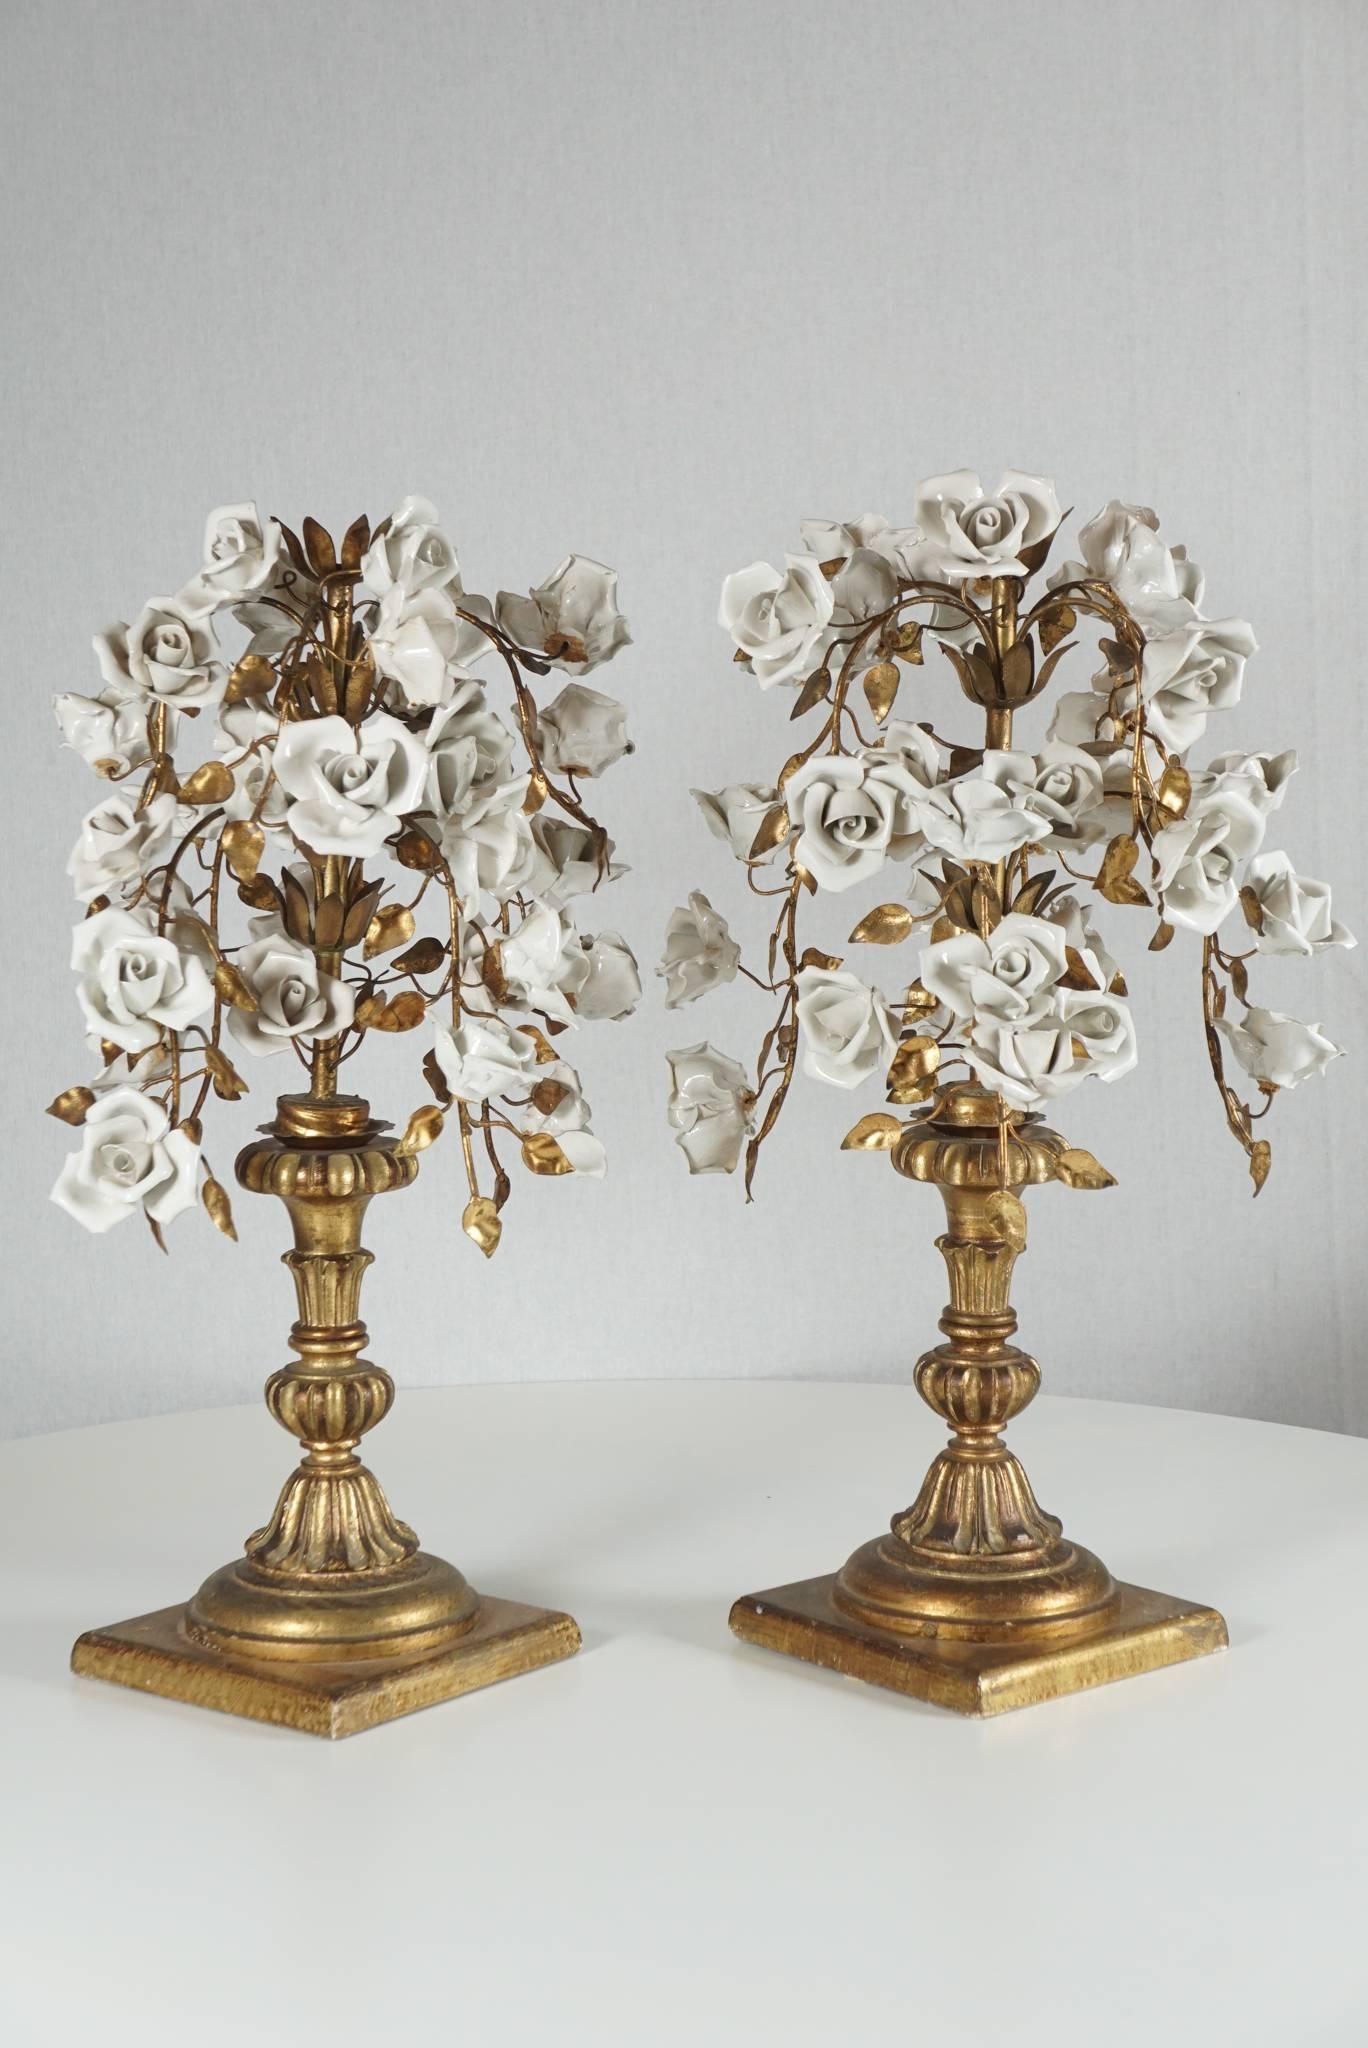 Here is a pair of beautiful blanc de chine rose bouquet sculptures on giltwood pedestal bases. The bouquet consists of gold painted stems and leaves. The pieces are originally stemmed inside and can easily become lamp bases.